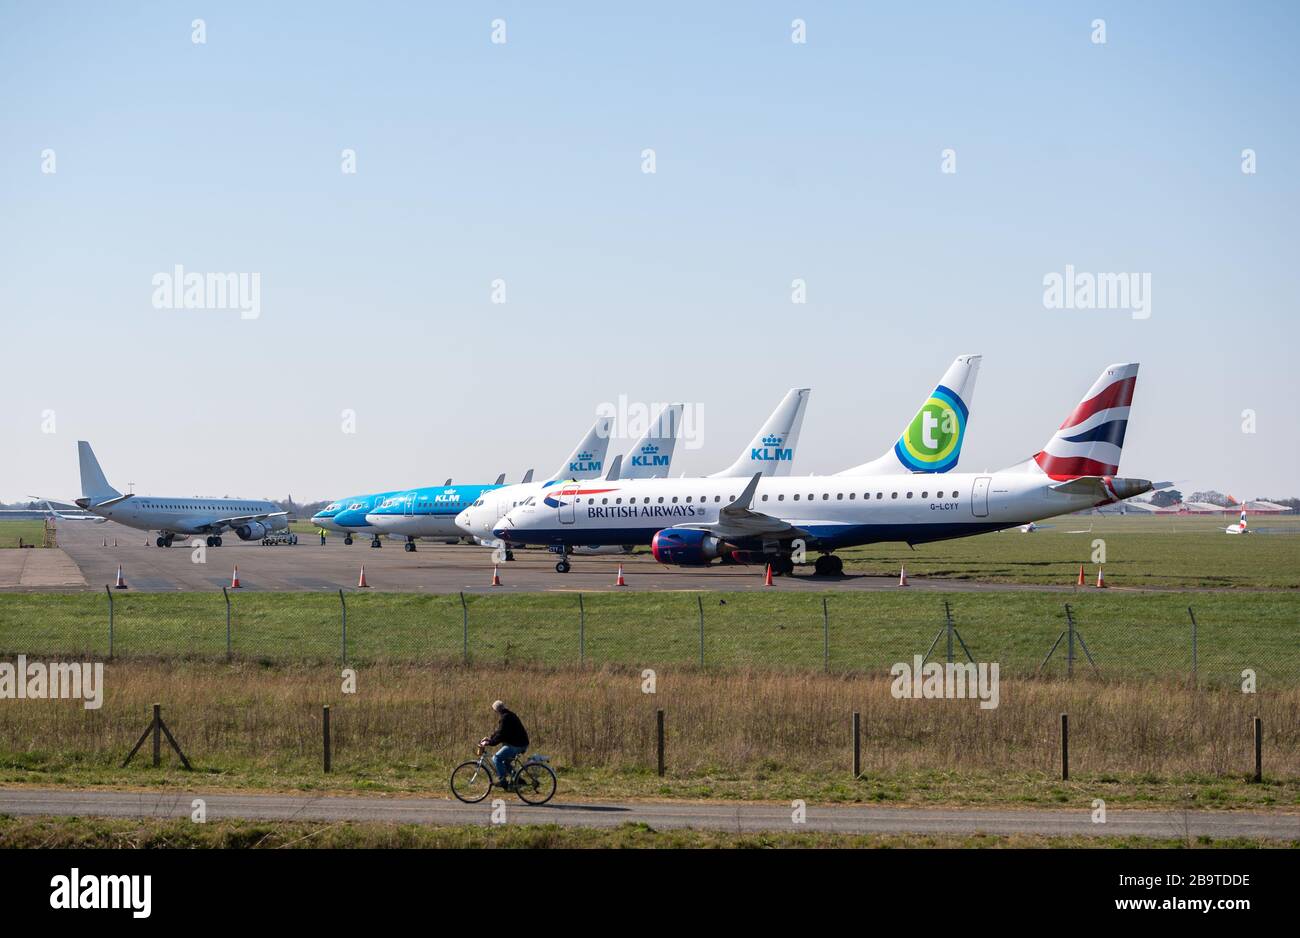 British Airways, KLM and Transavia aircraft parked at Norwich Airport after reduced flights amid travel restrictions and a huge drop in demand as a result of the coronavirus pandemic. Stock Photo